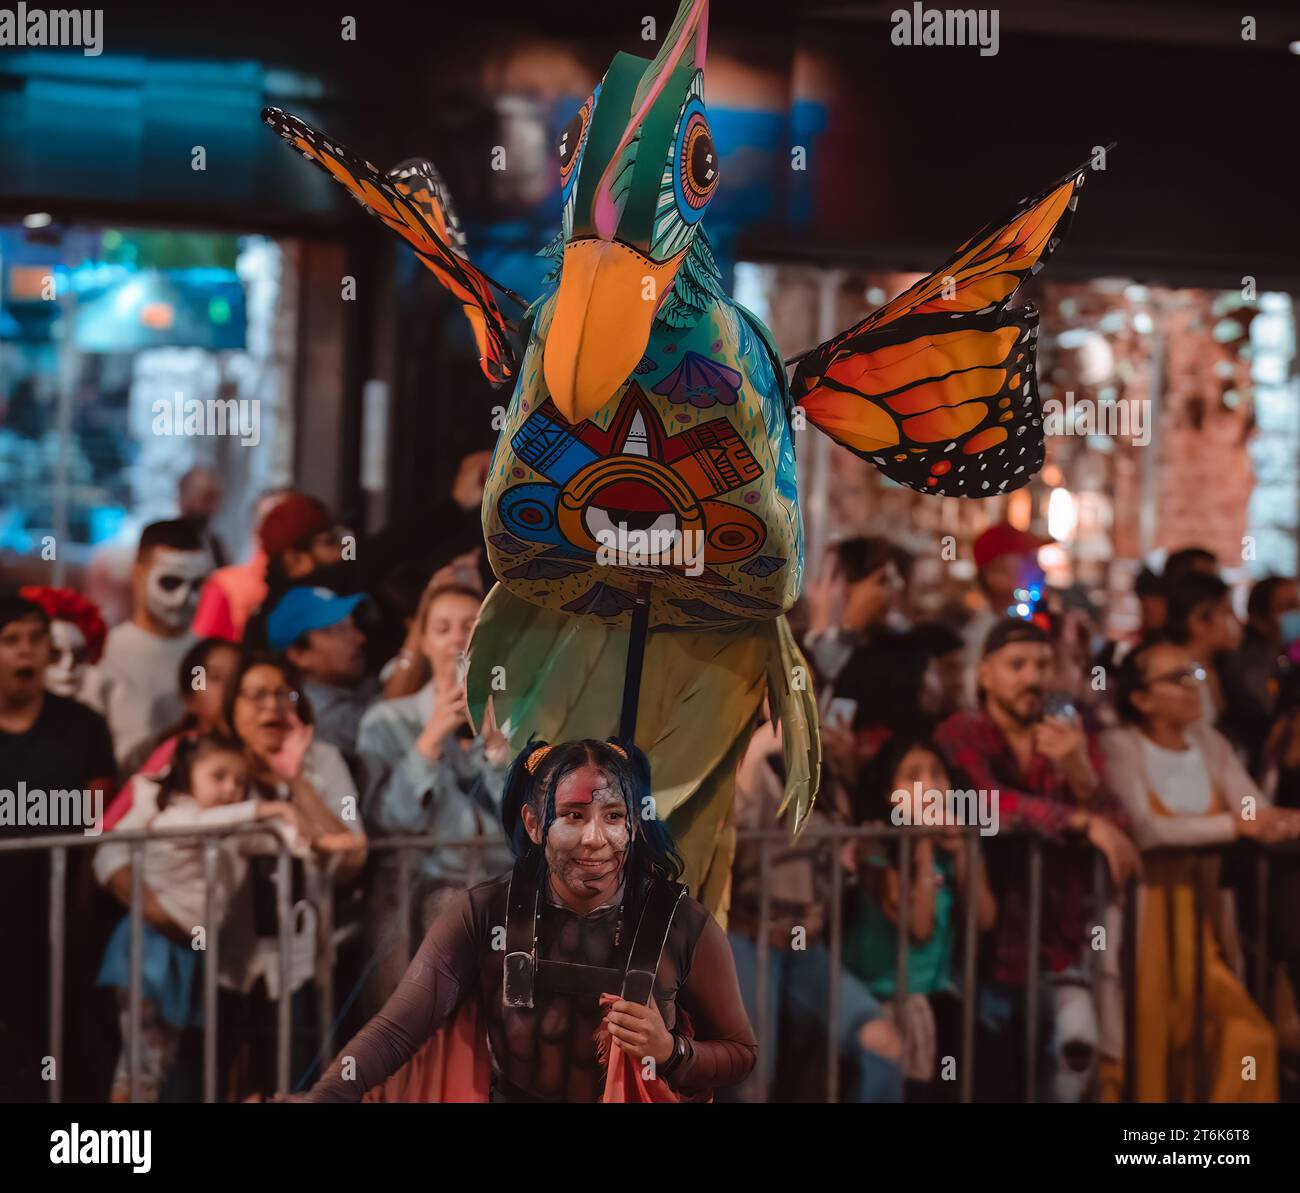 MEXICO CITY, MEXICO - NOVEMBER 04, 2023: Day of the dead parade 2023 in Mexico City, Float representing an 'alebrije', Day of the Dead traditional par Stock Photo